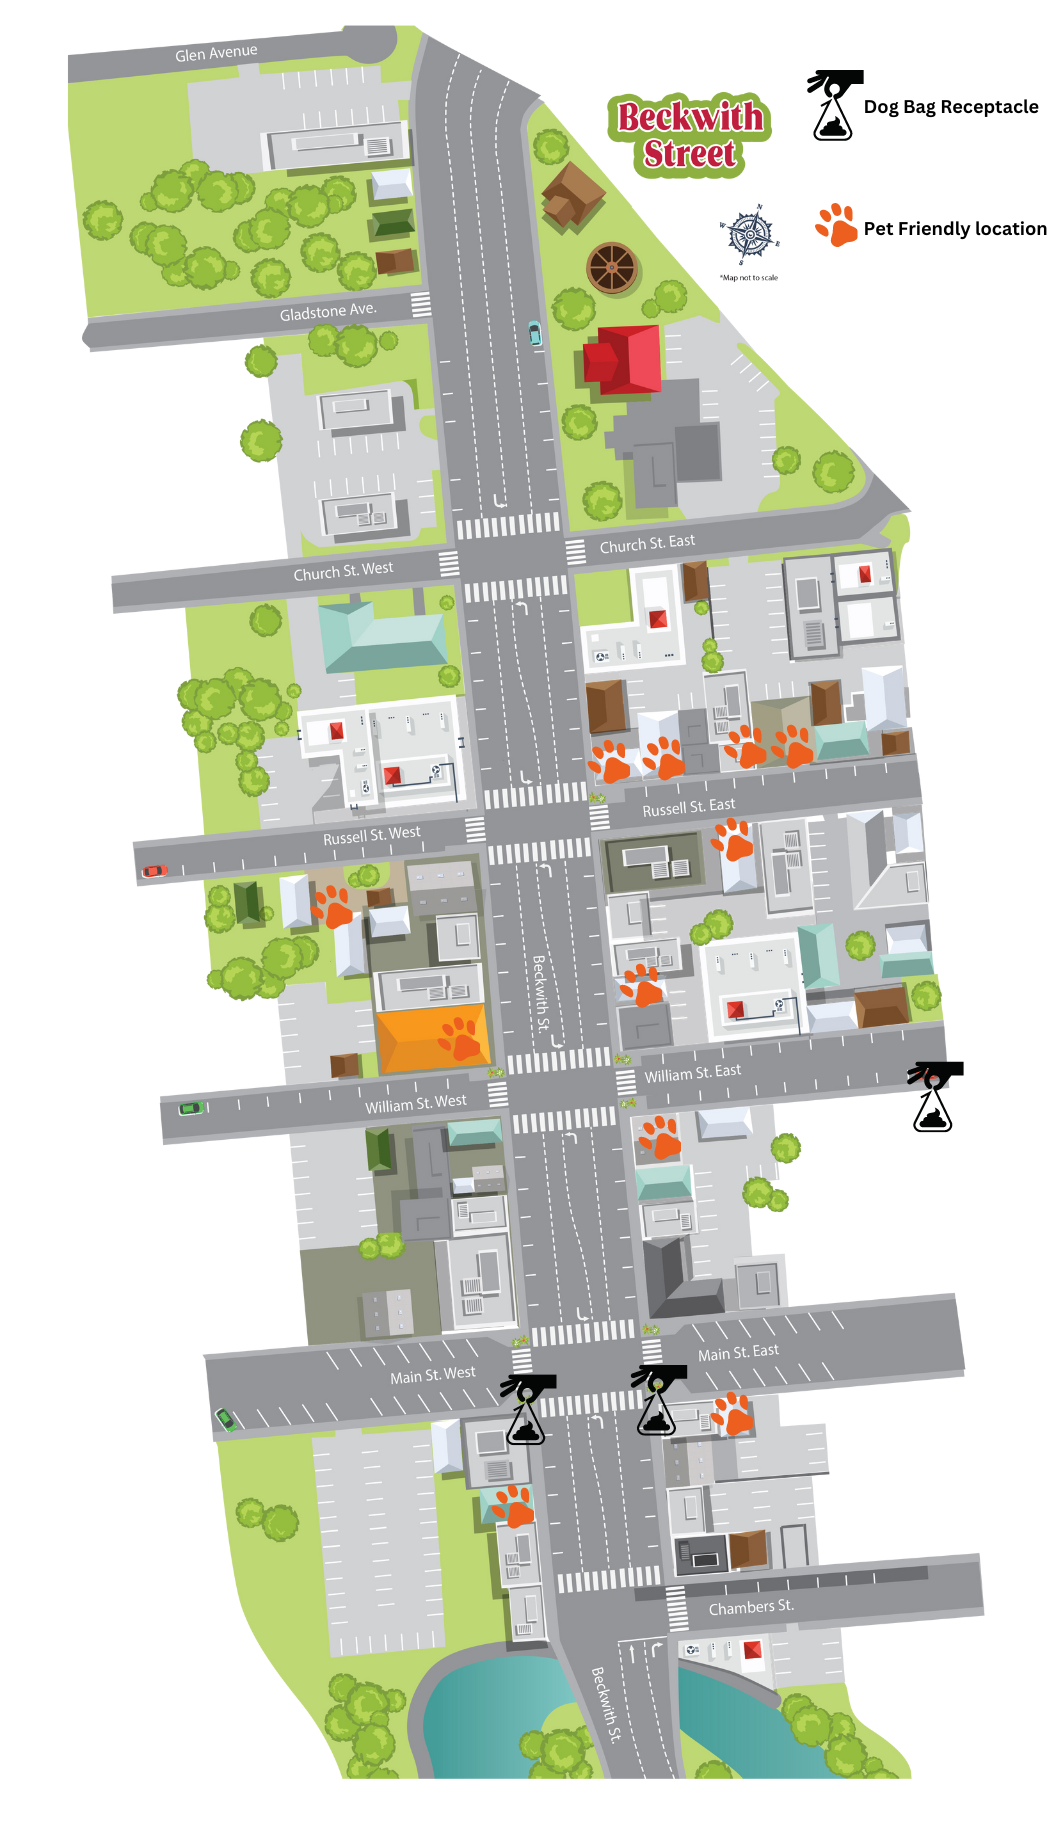 map of Beckwith street highlighting pet friendly locations.